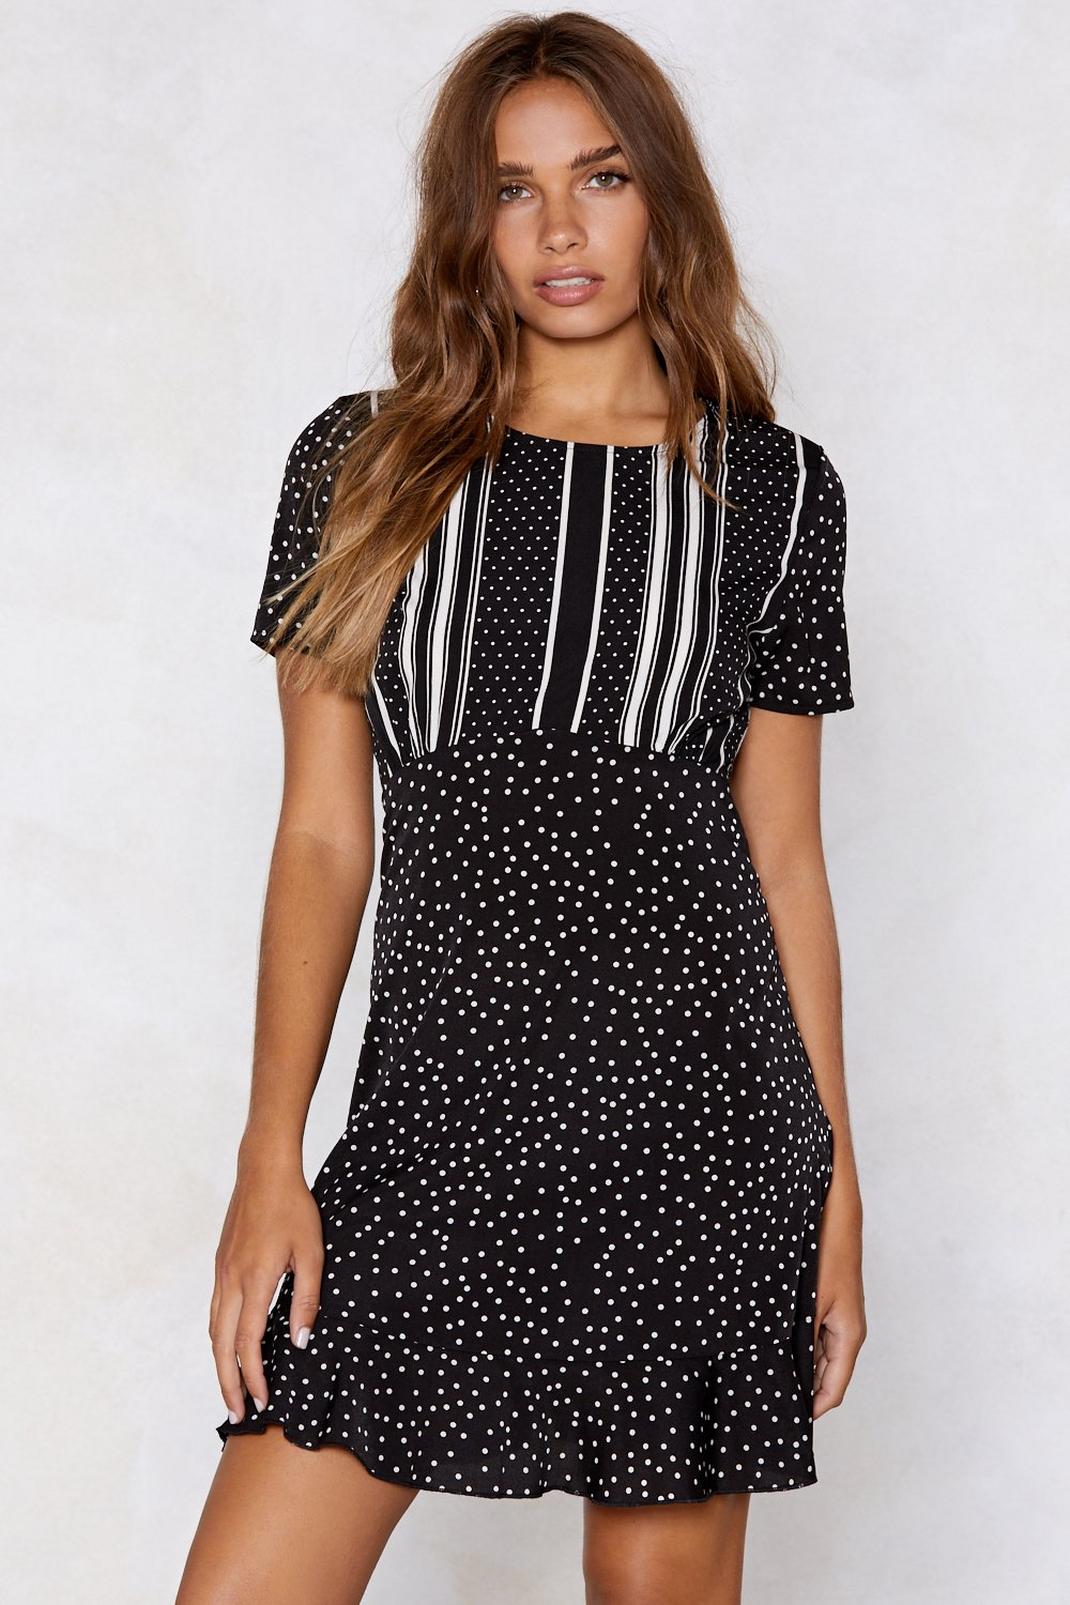 Opposites Attract Striped and Polka Dot Dress image number 1